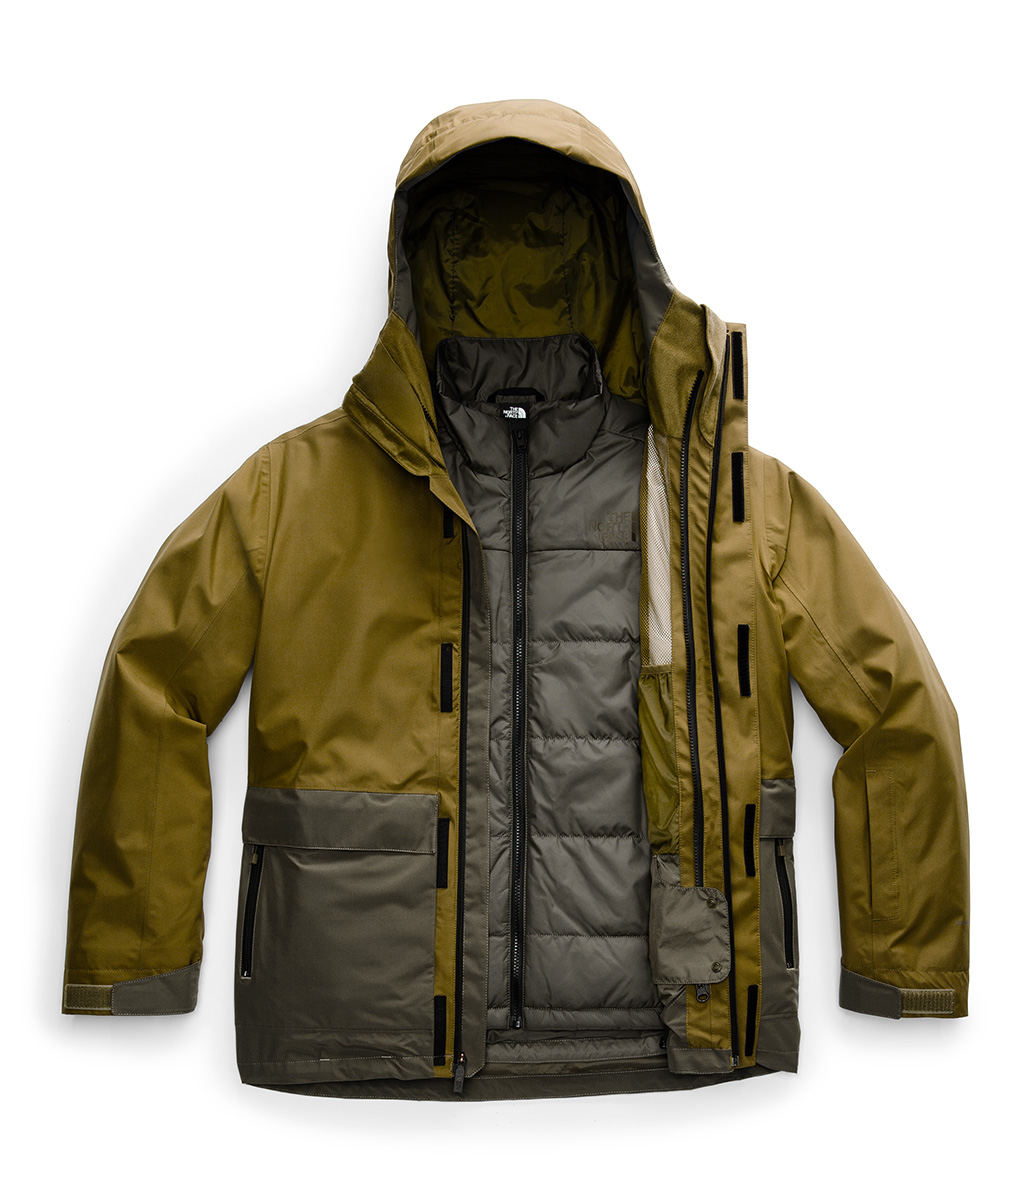 Vermont Gear - Farm-Way: The North Face Men's Clement Triclimate 